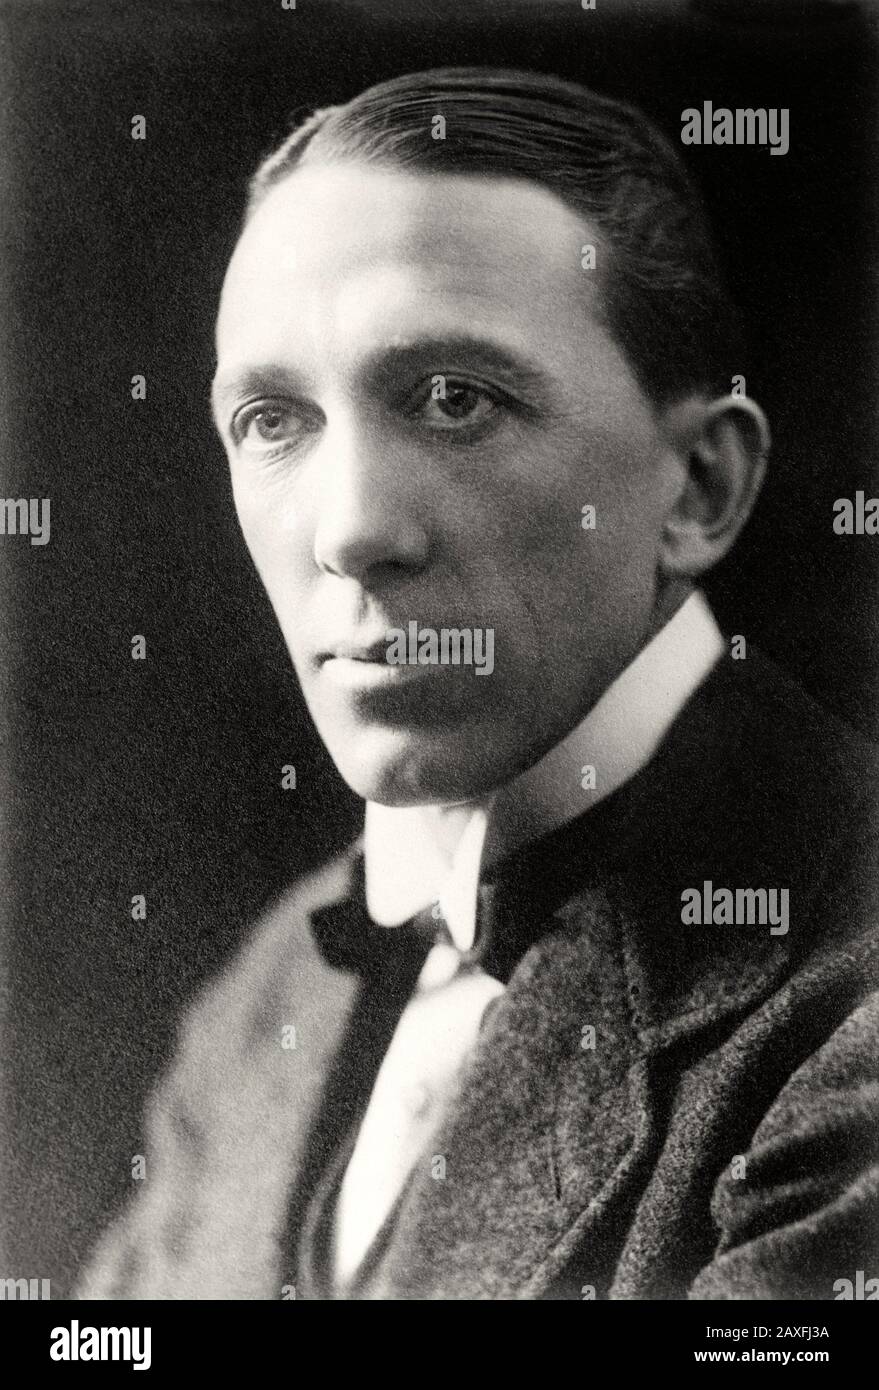 1910 ca , London , Great Britain : Sir Gerald Hubert Edward Busson du Maurier ( 1873 – 1934 ) was an English actor and manager . He was the son of the writer  and painter illustrator George Palmezza Busson du Maurier ( 1834 - 1896 ), brother of Sylvia Llewelyn Davies, and father of the writers Angela du Maurier and Dame Daphne du Maurier ( 1907 - 1989 ) . He was also a friend of Henry James.  - attore teatrale  - TEATRO - THEATER  - BELLE EPOQUE  - collar - colletto -  tie bow - papillon - cravatta - fusoliera aereoplano © Archivio GBB / Stock Photo